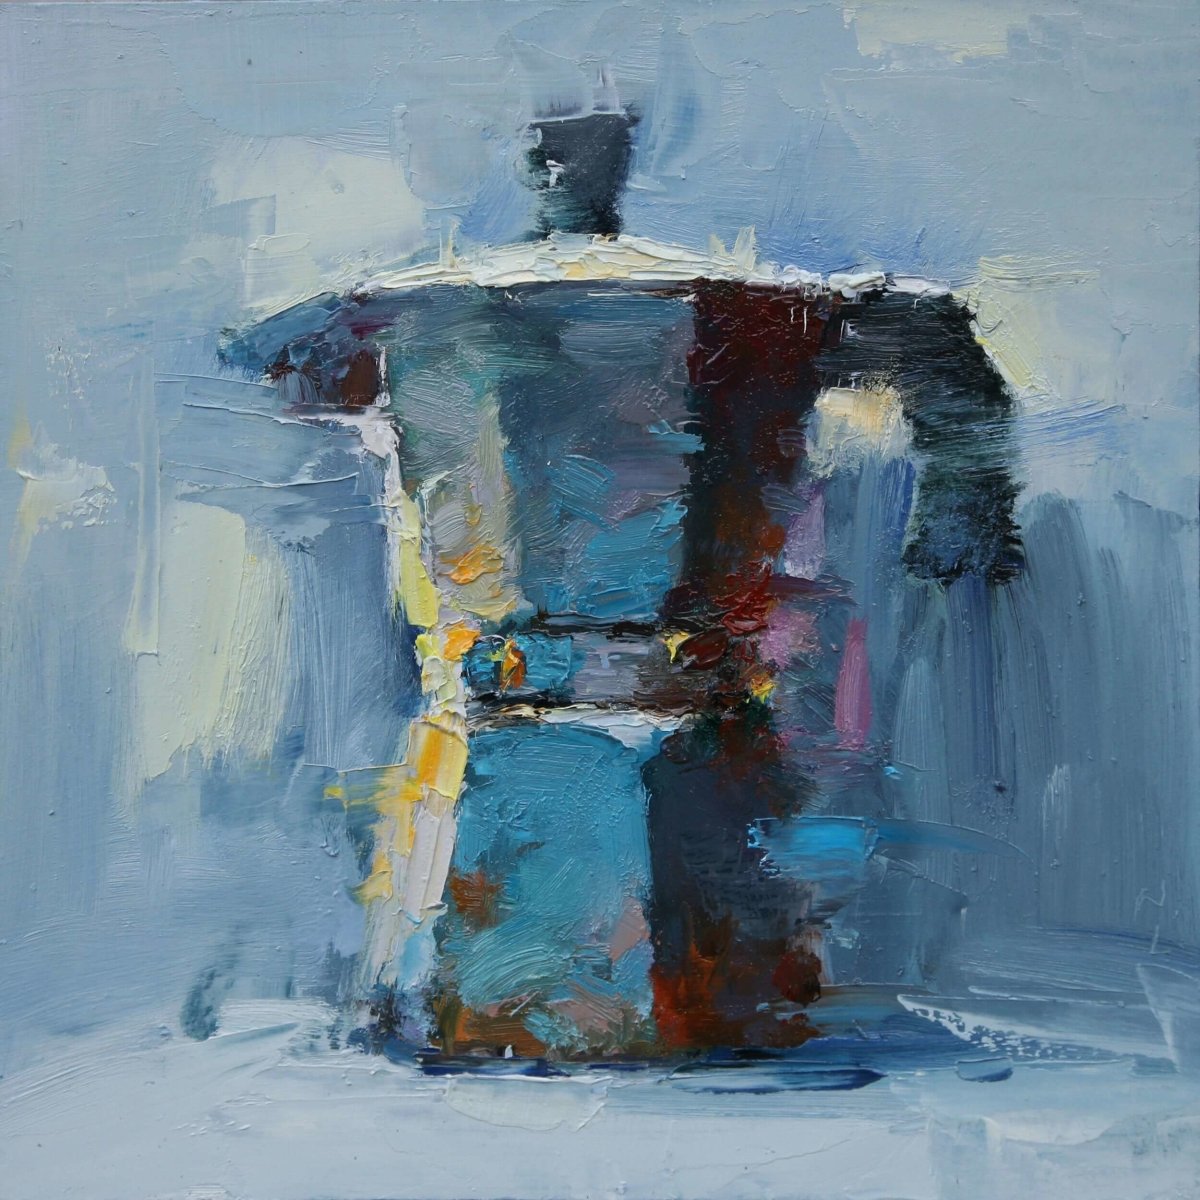 Coffee Maker by Ning Lee at LePrince Galleries